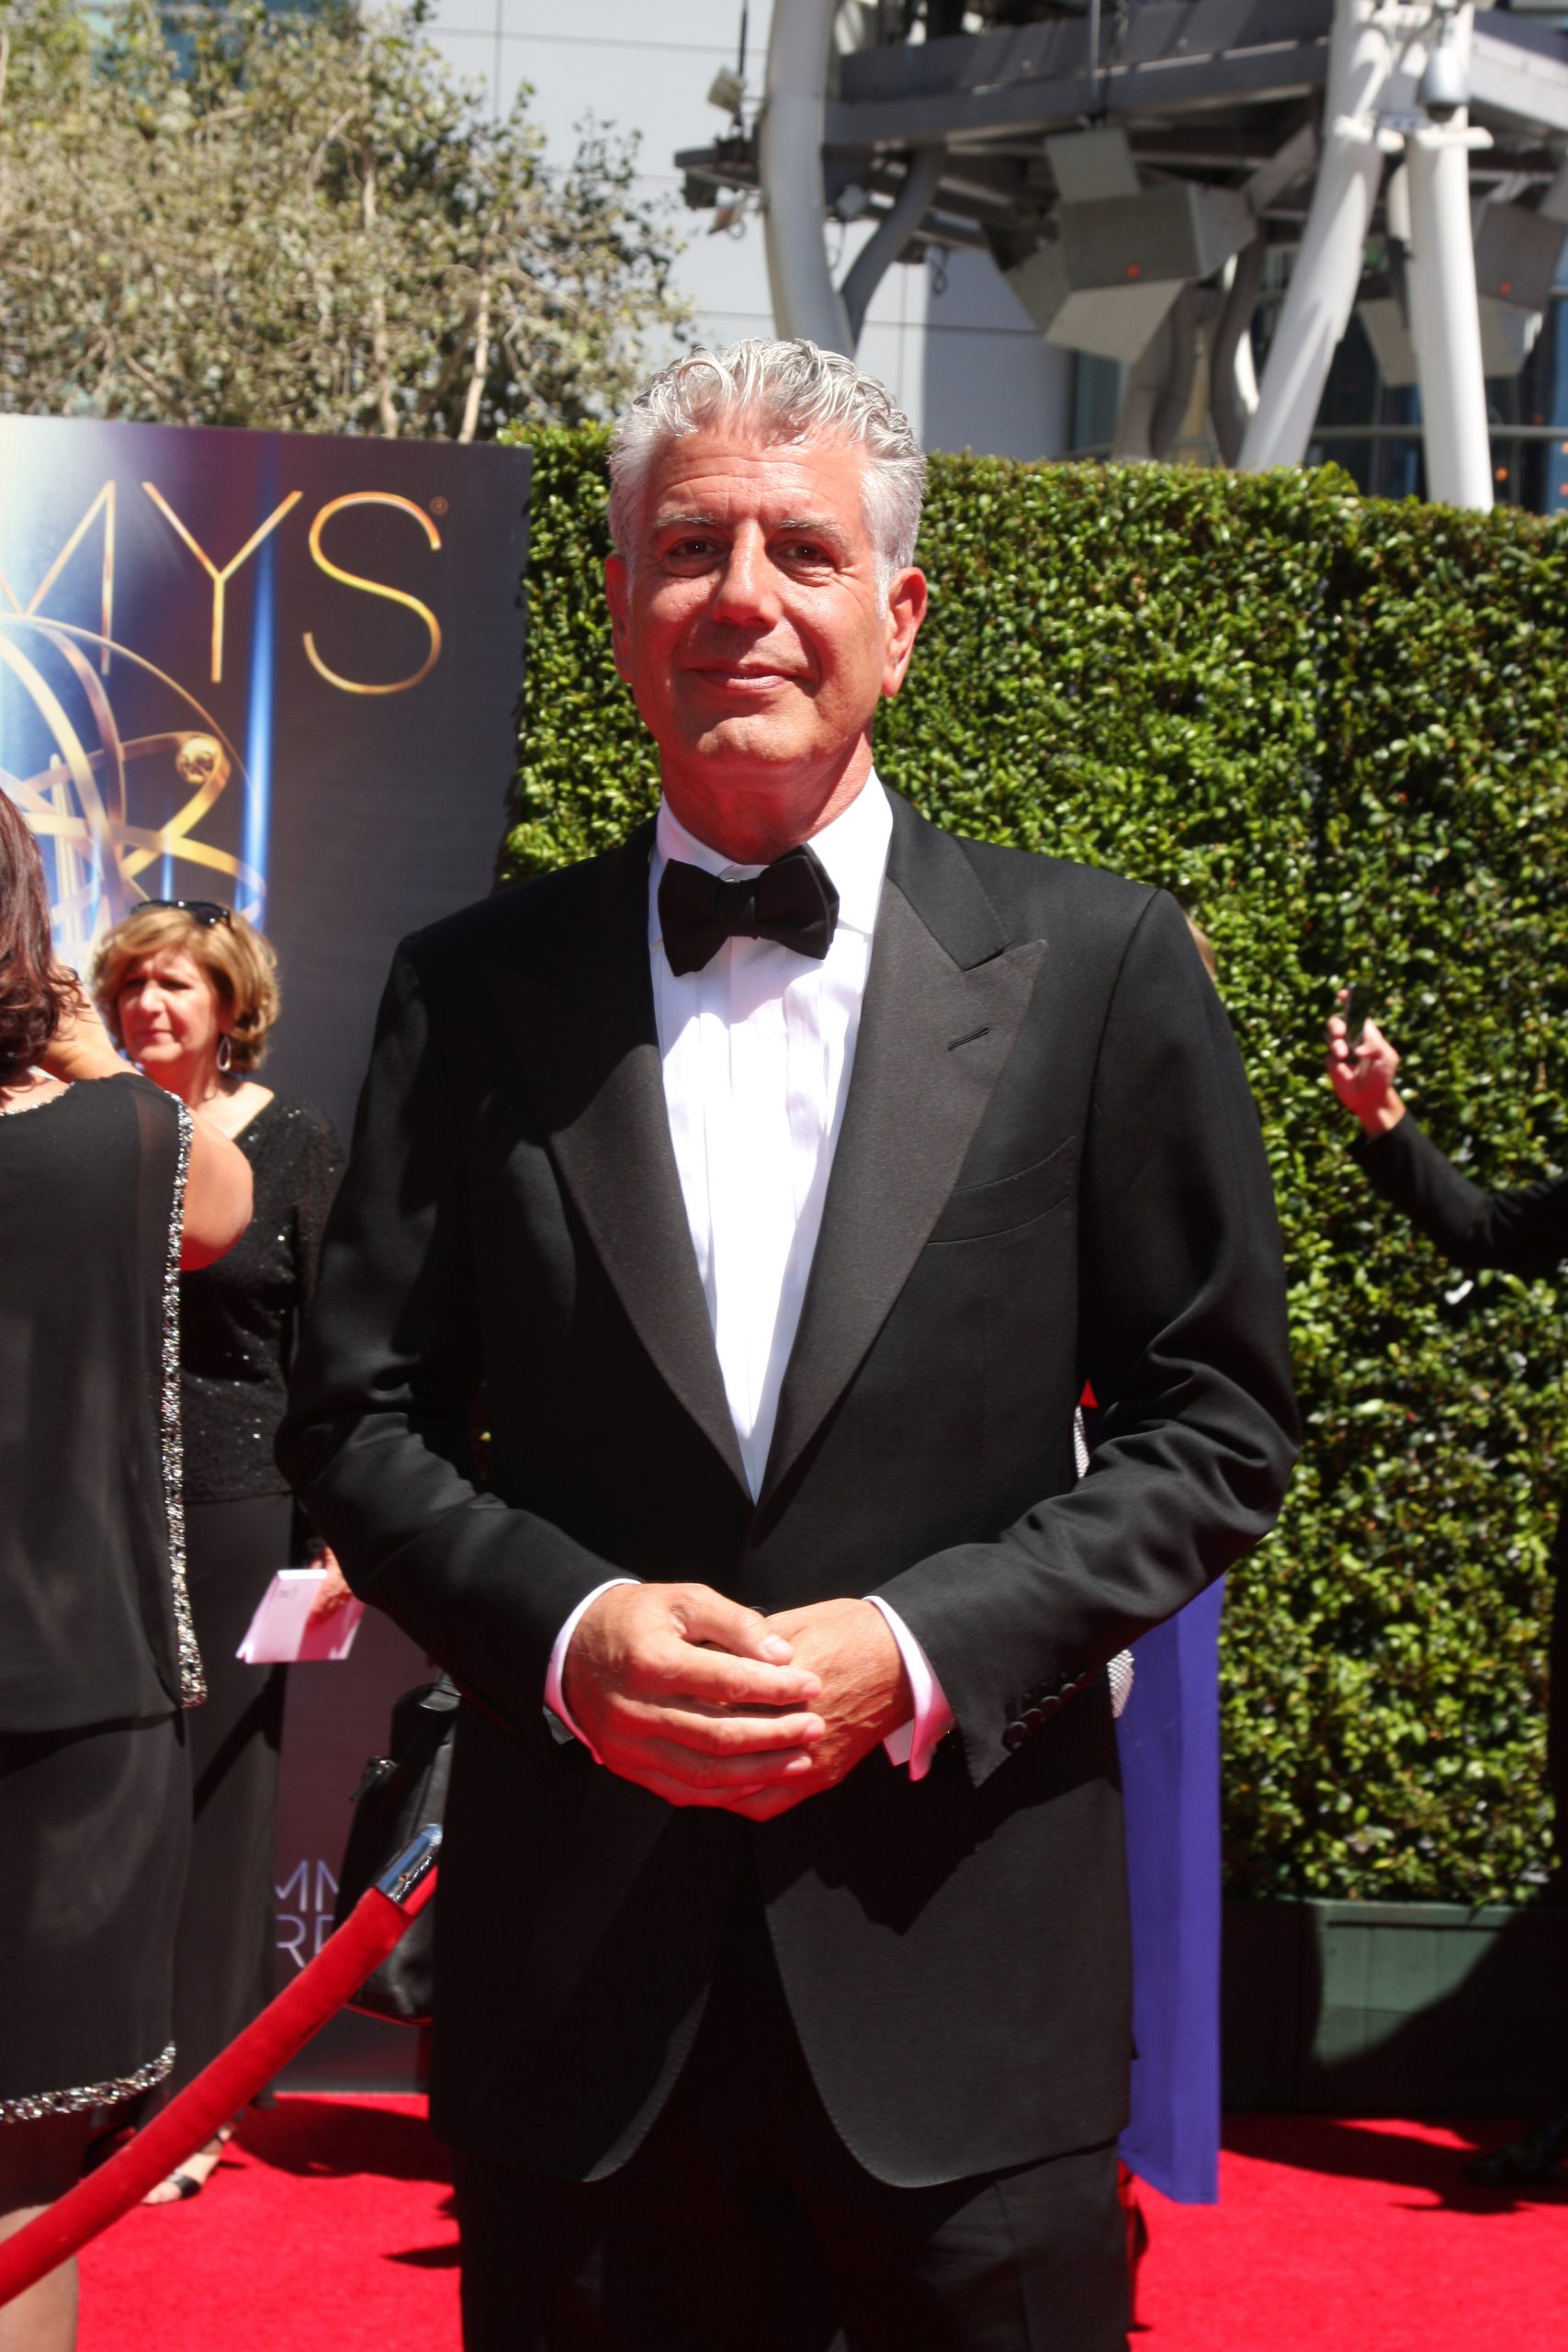 Anthony Bourdain at the red carpet to celebrate his great travel show